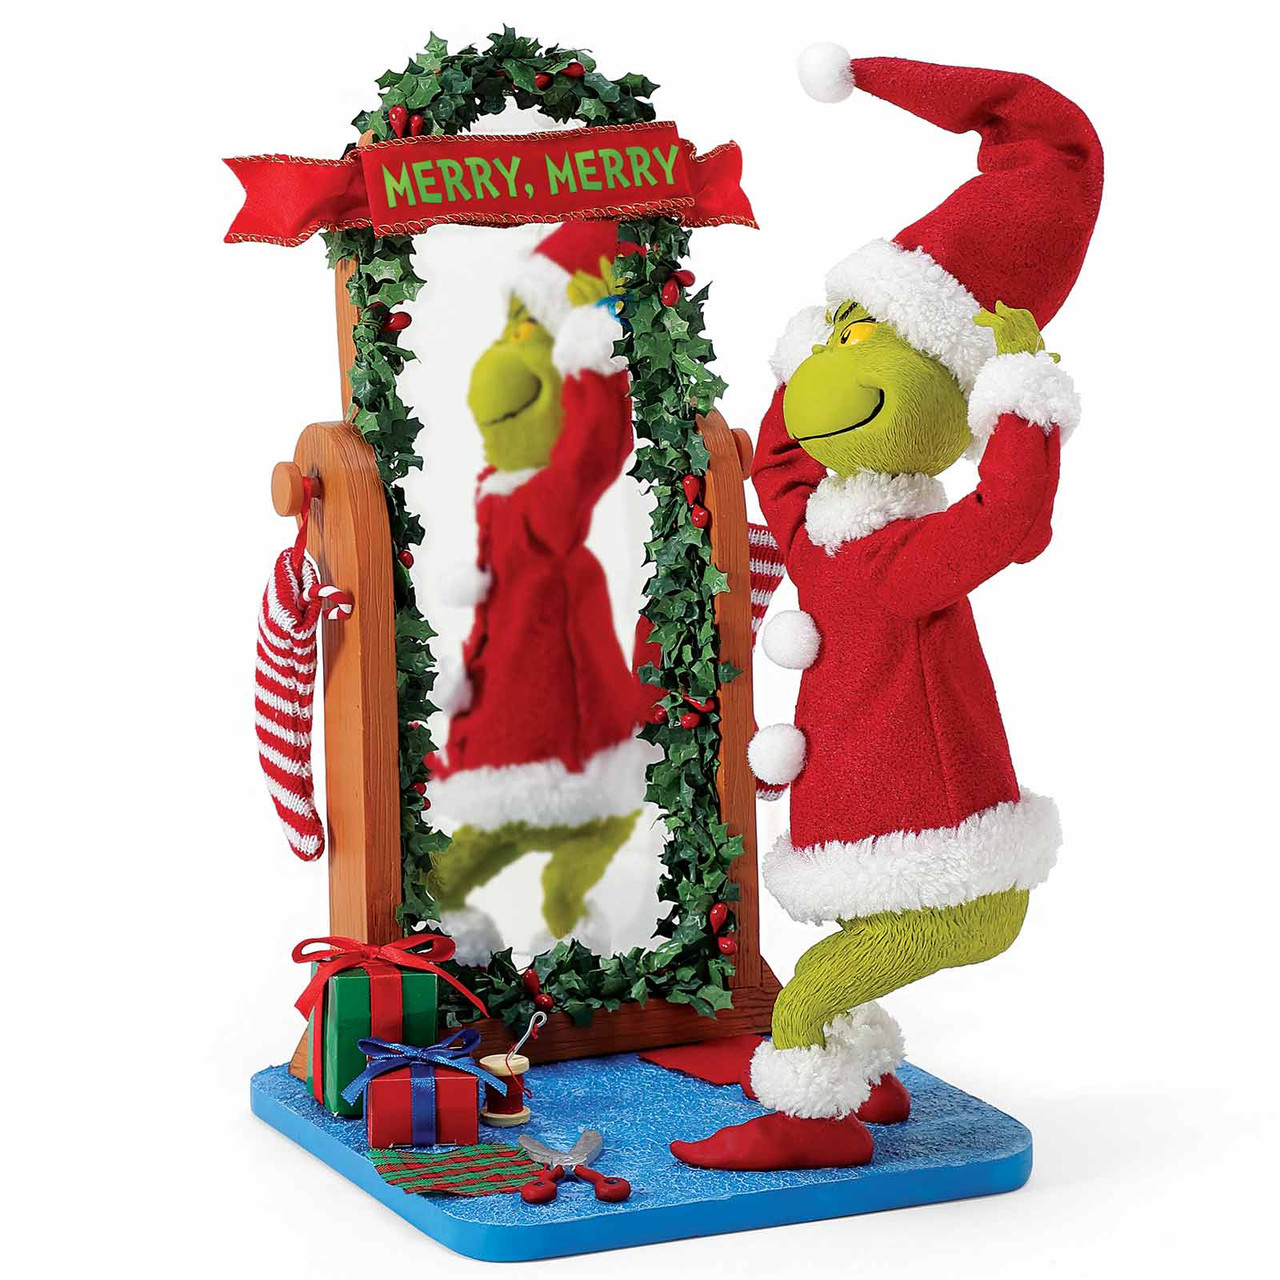 The Grinch Who Stole Christmas Playset with Figures and Accessories BRAND  NEW